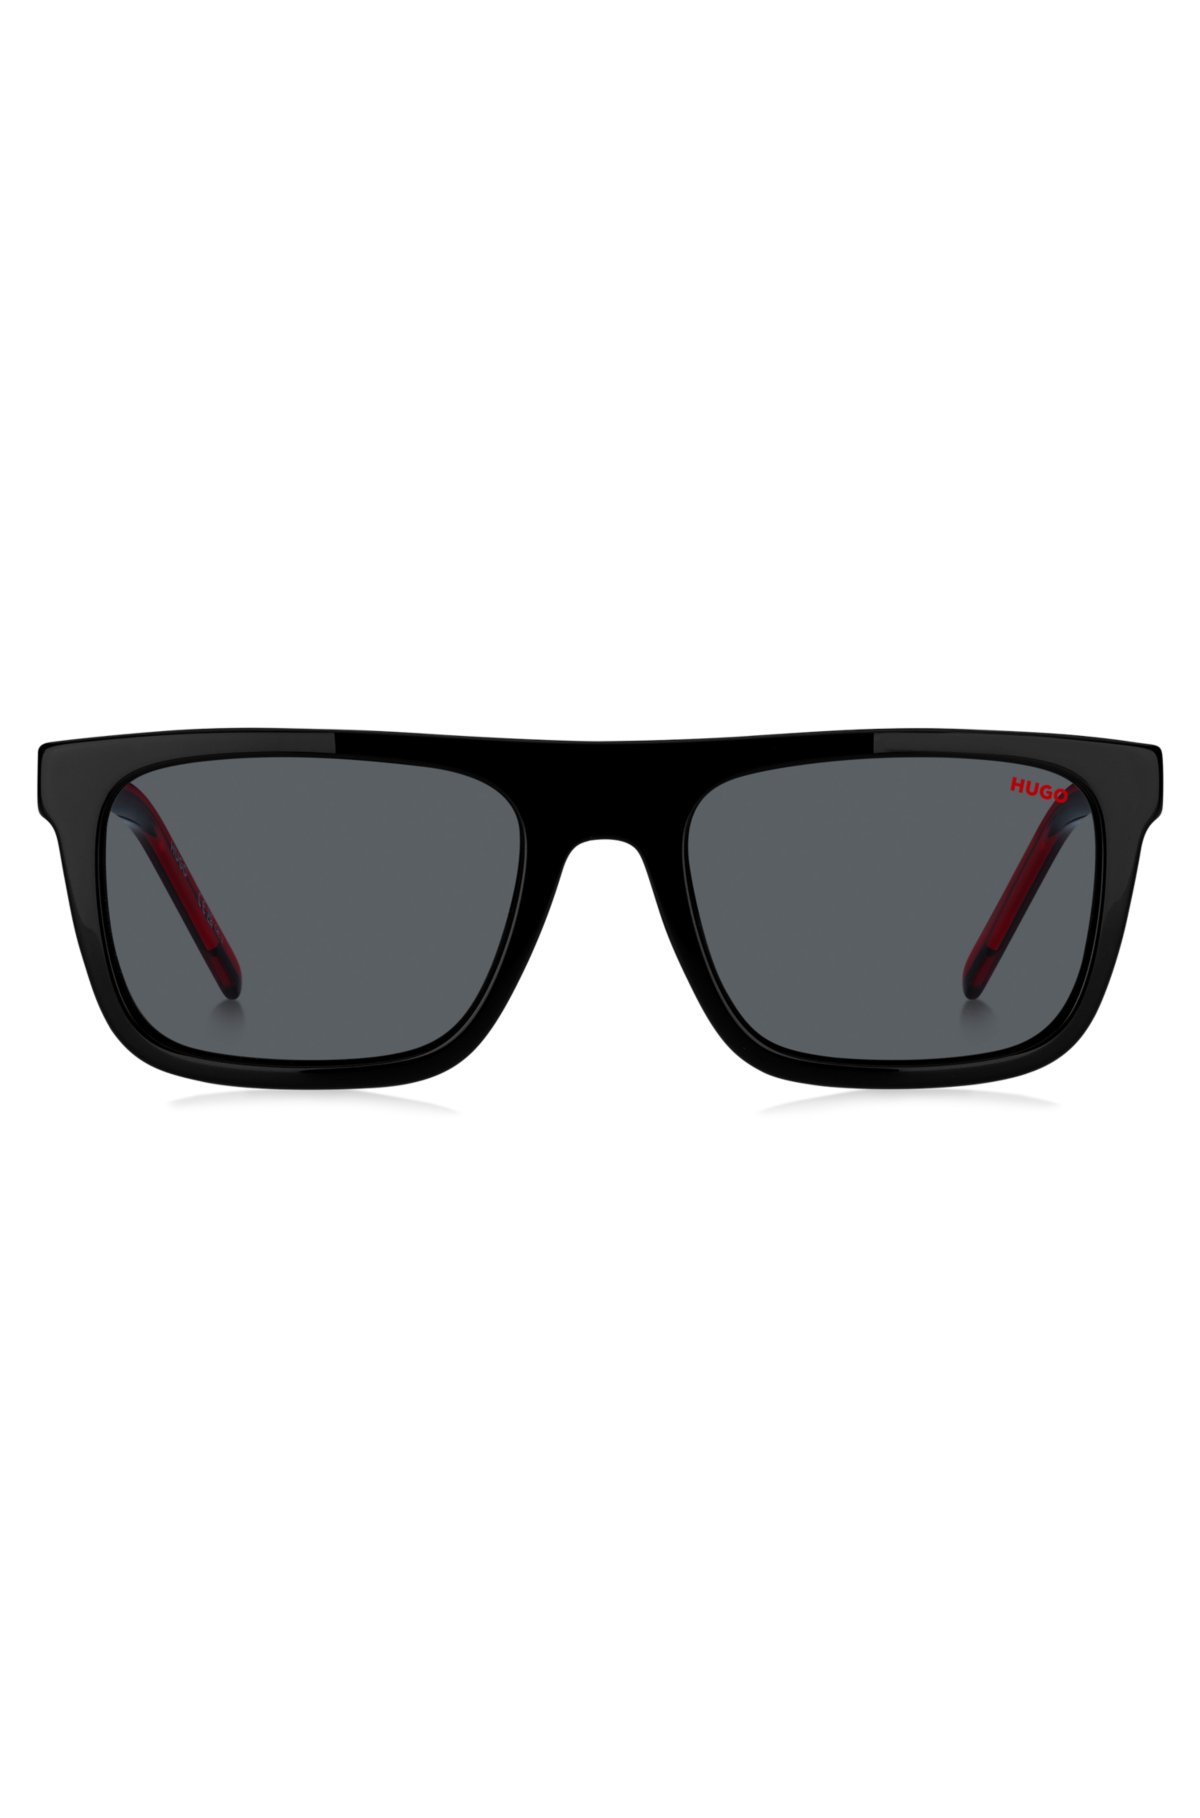 Black-acetate sunglasses with layered temples, Black